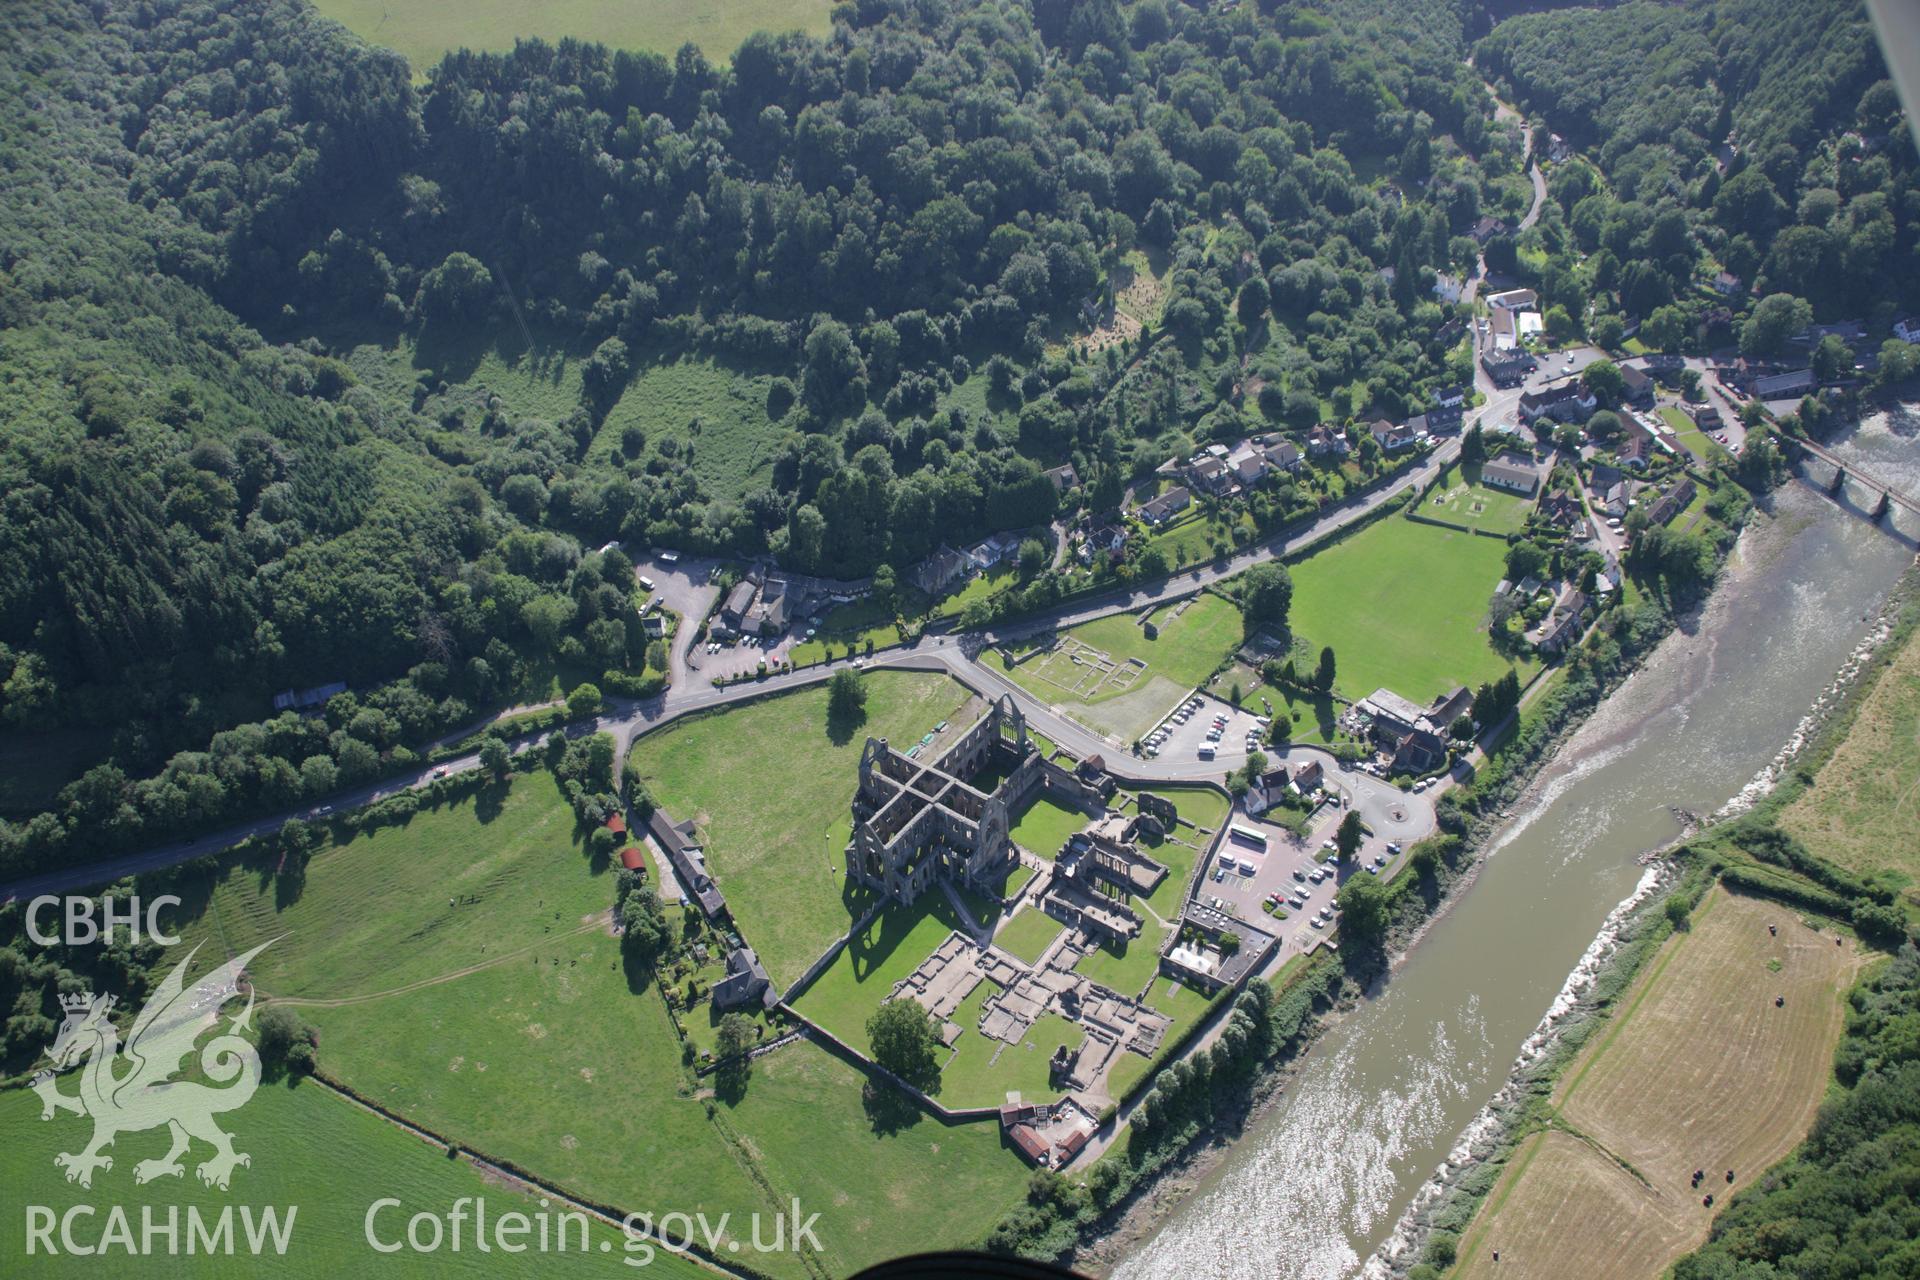 RCAHMW colour oblique aerial photograph of Tintern Abbey. Taken on 13 July 2006 by Toby Driver.